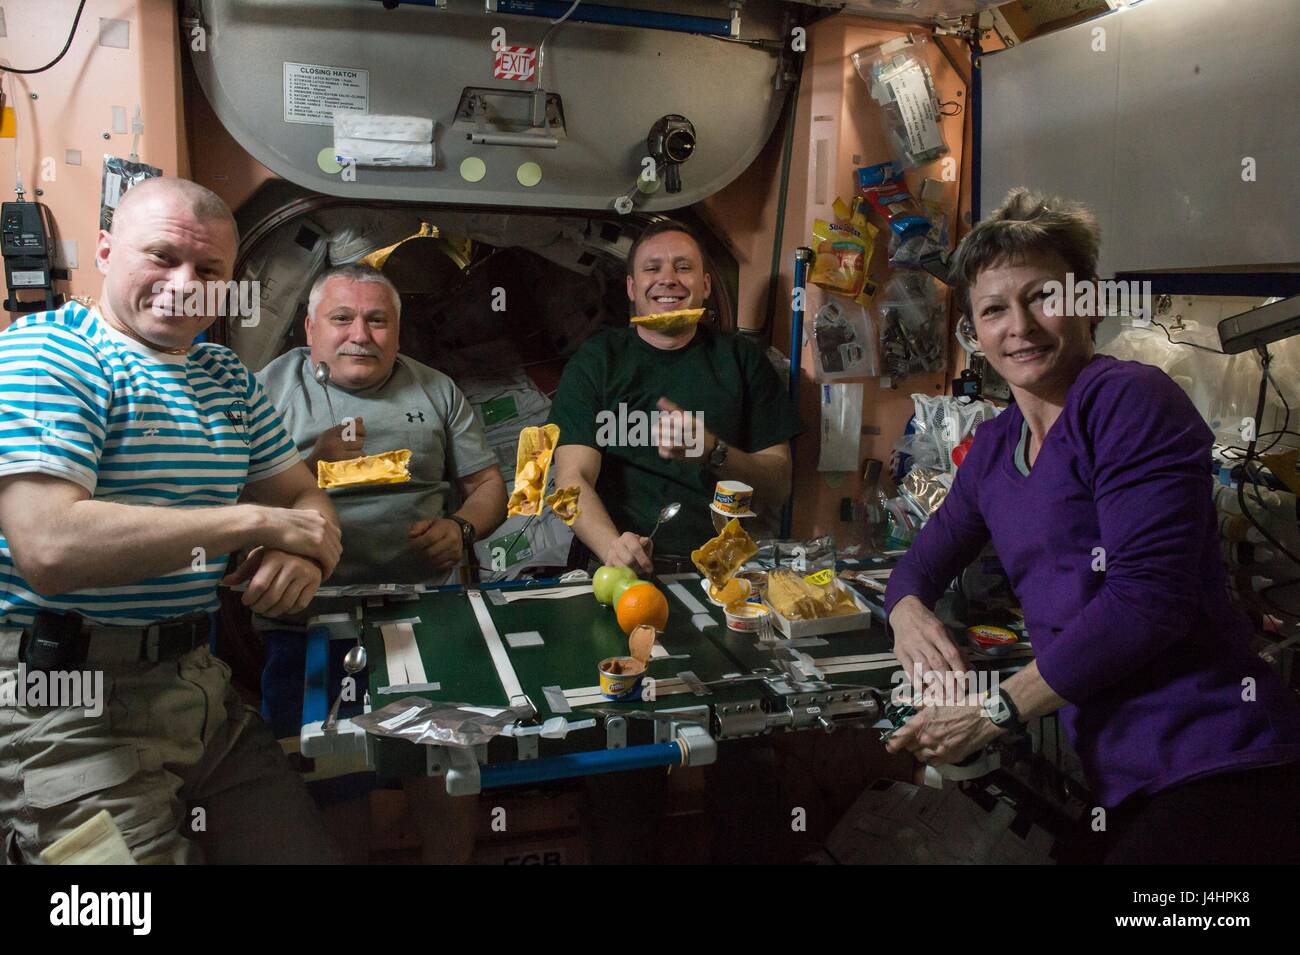 NASA International Space Station Expedition 51 prime crew members (L-R) Russian cosmonauts Oleg Novitskiy and Fyodor Yurchikhin of Roscosmos, and American astronauts Jack Fischer and Peggy Whitson share a meal inside the ISS Unity module April 23, 2017 in Earth orbit.     (photo by NASA via Planetpix) Stock Photo